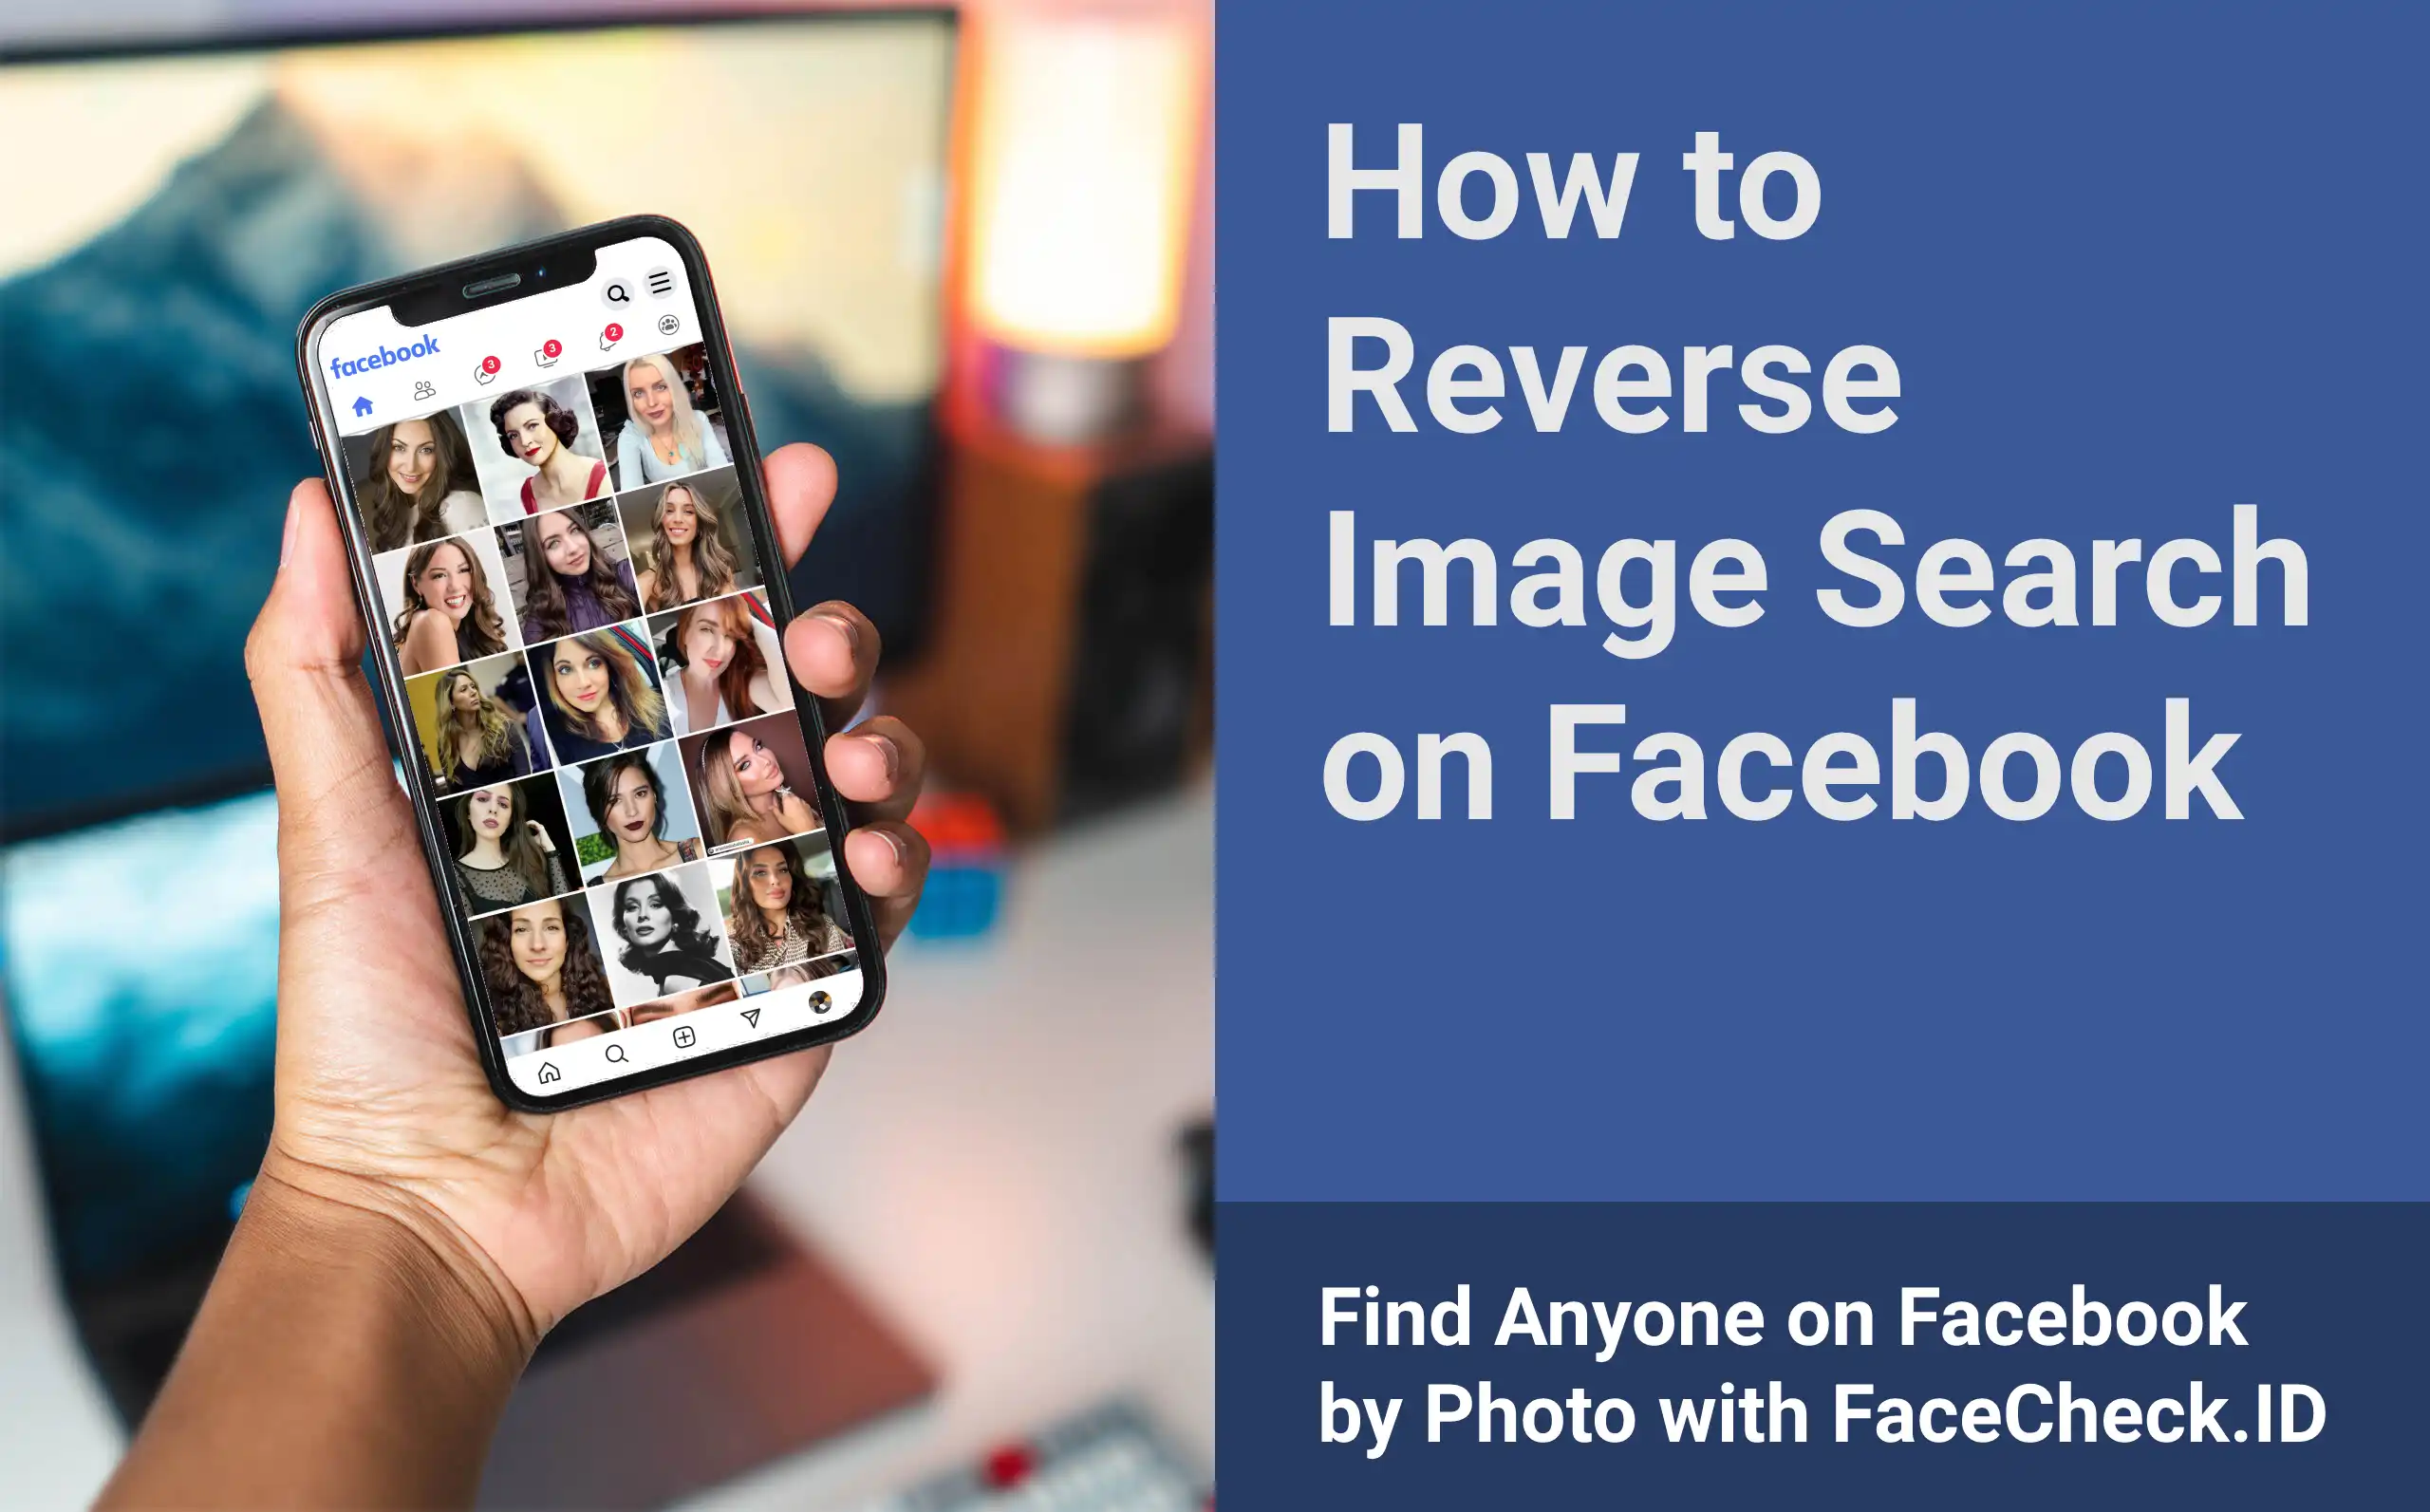 how to reverse image search on Facebook